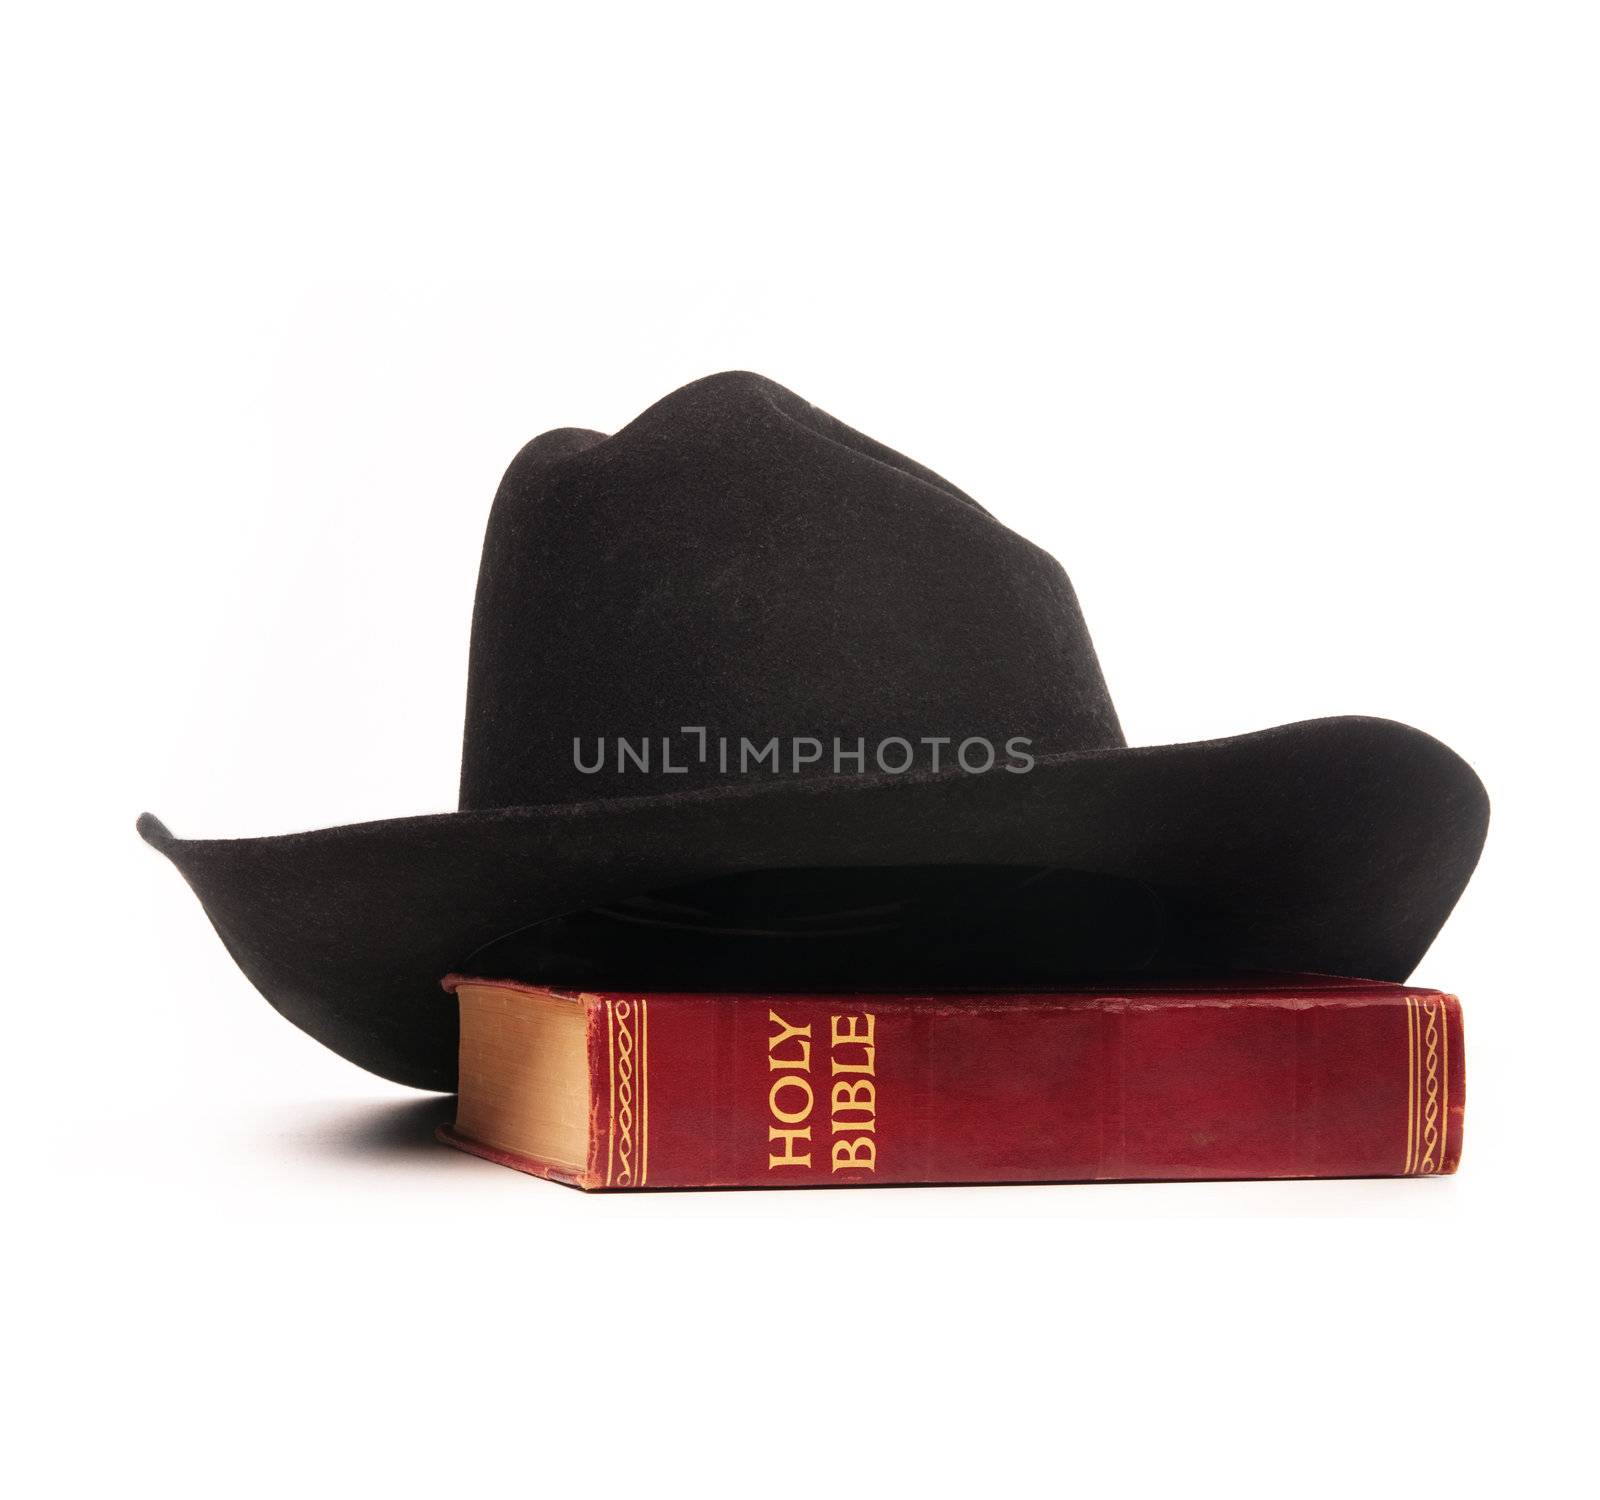 Cowboy hat and bible  by Paulmatthewphoto